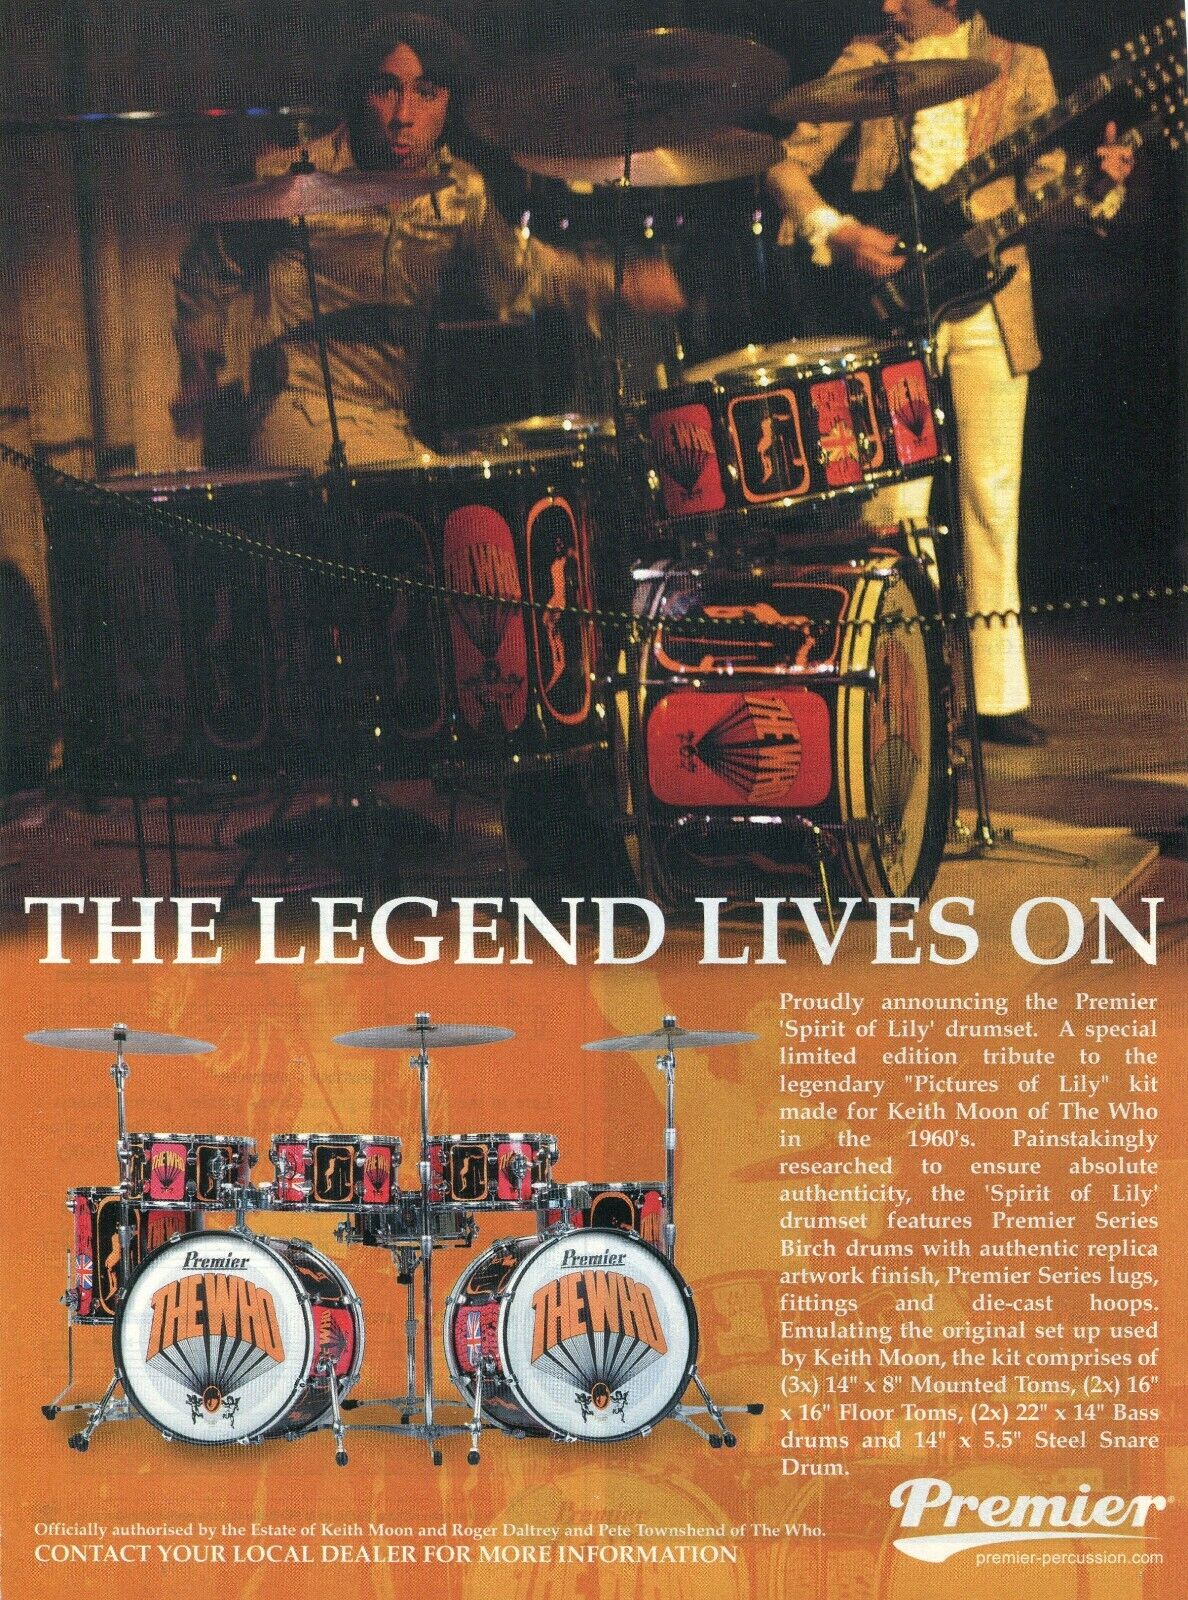 2006 Print Ad of Premier Spirit of Lily Drum Kit Tribute to Keith Moon The Who